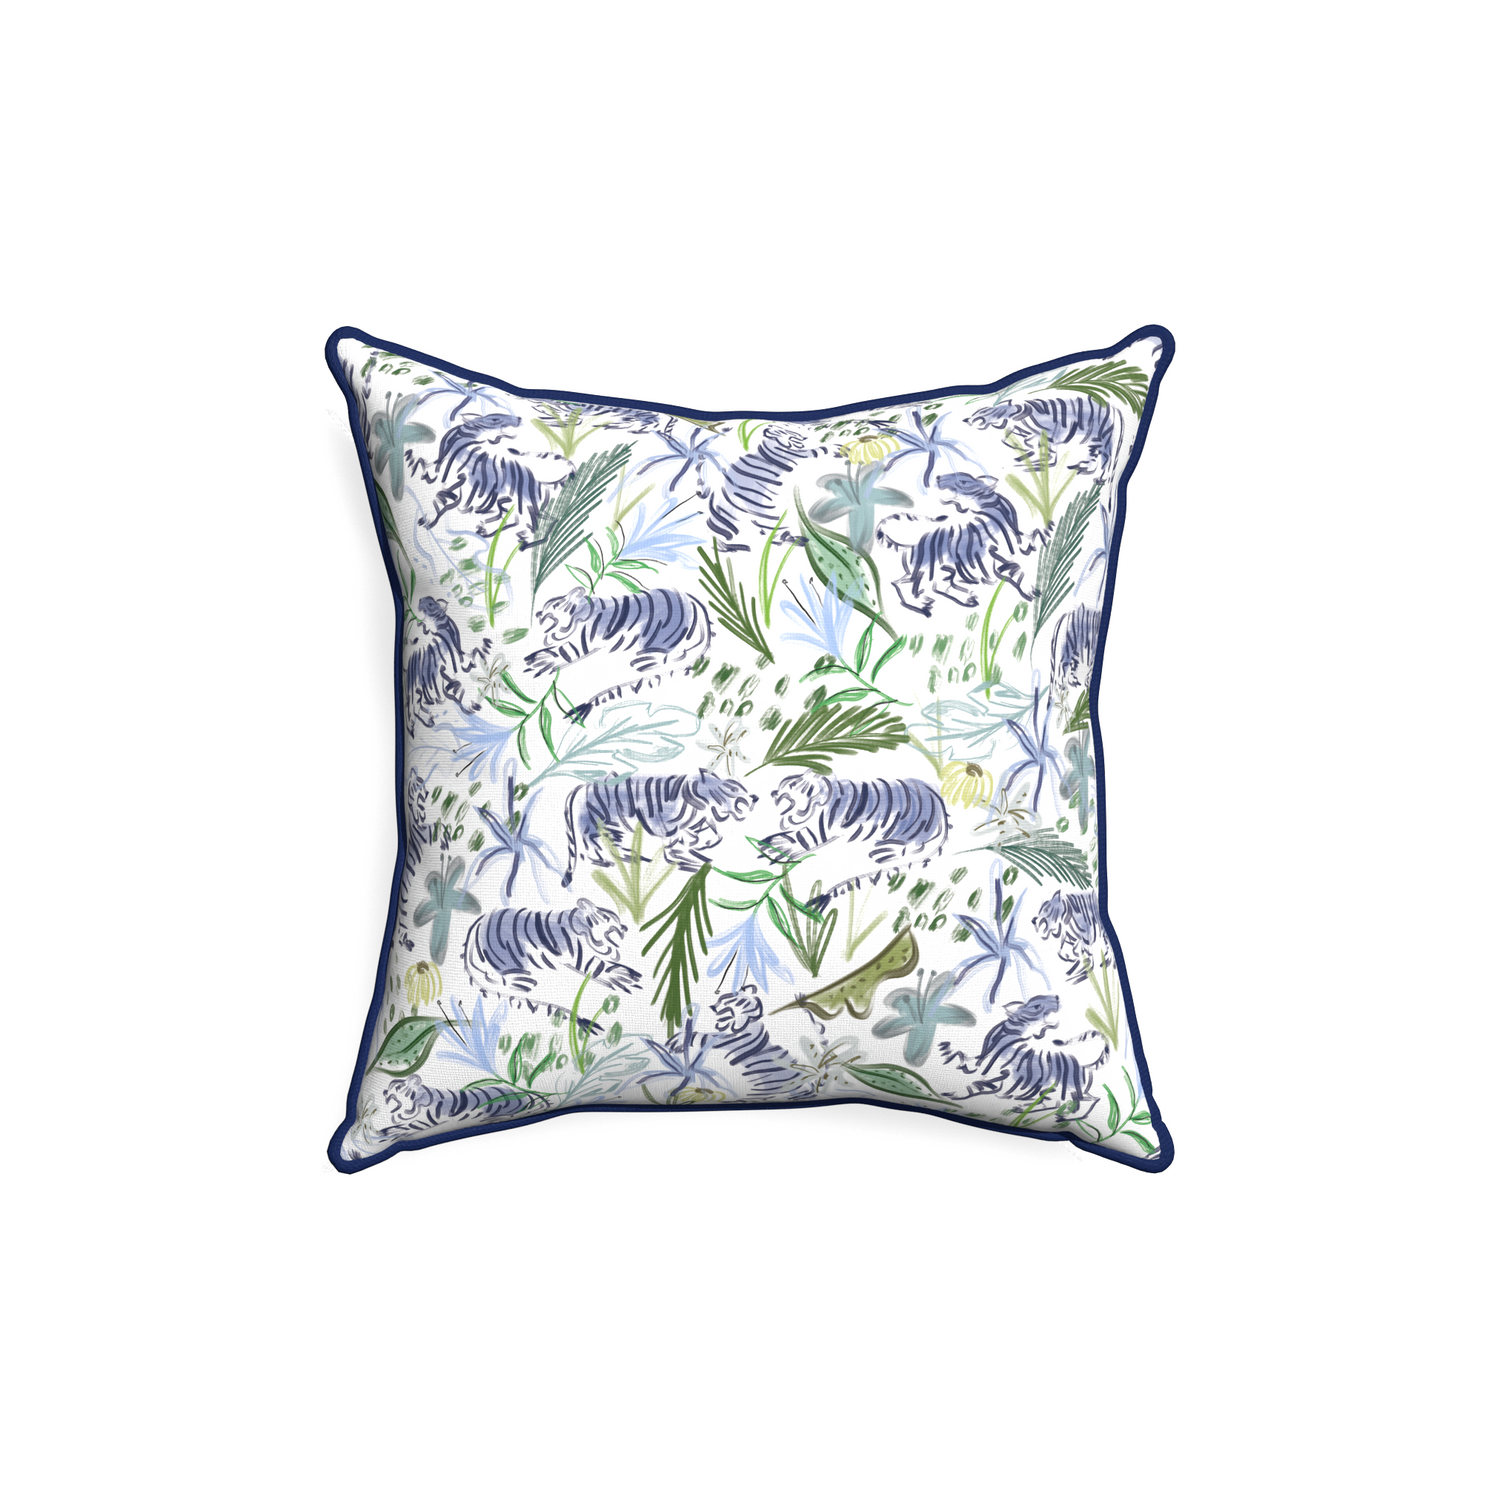 18-square frida green custom green tigerpillow with midnight piping on white background